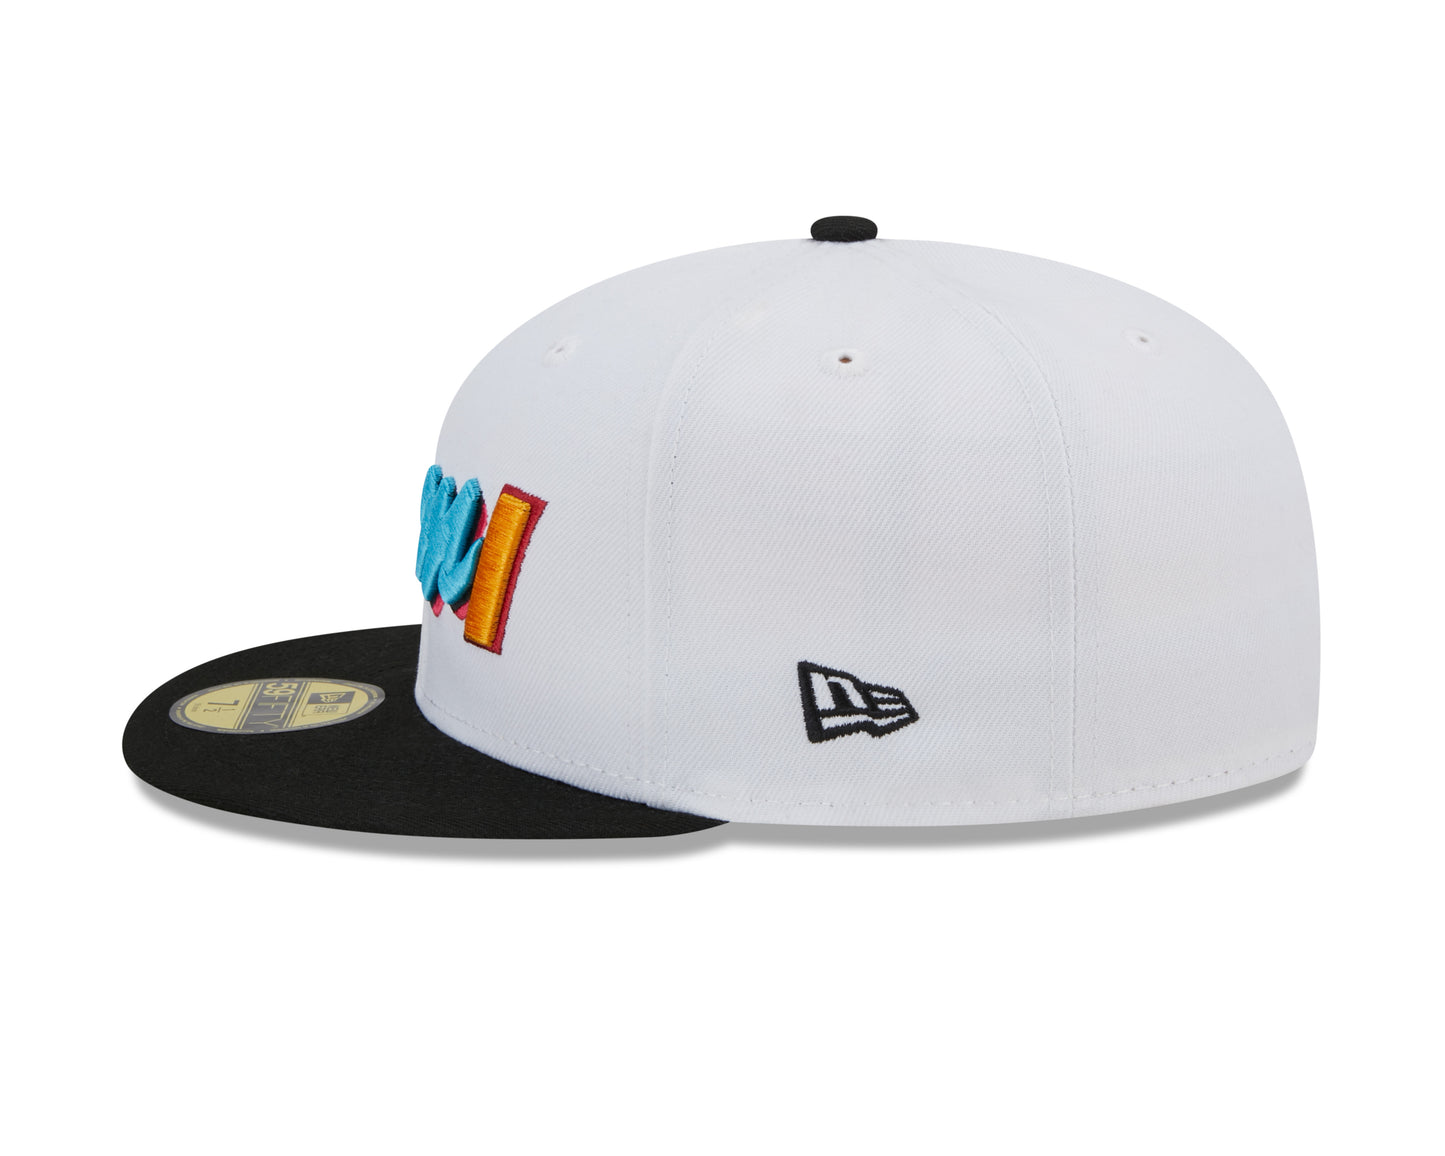 Miami Heat New Era City Edition 59FIFTY Fitted Hat - White